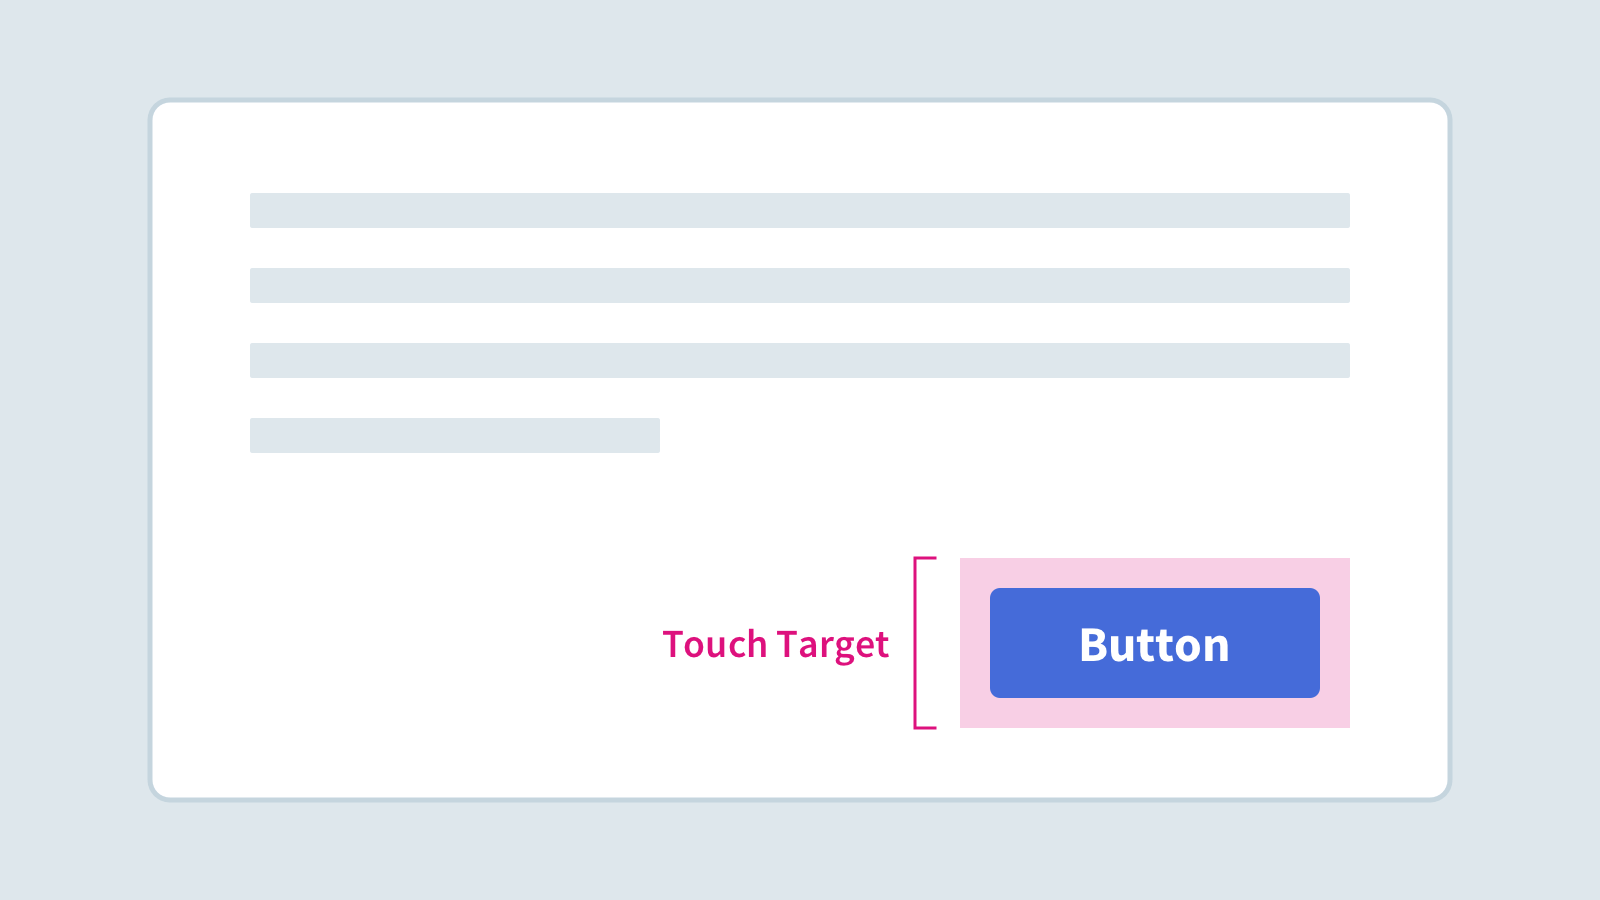 A touch target extends past the visual boundaries of a button element within a web page